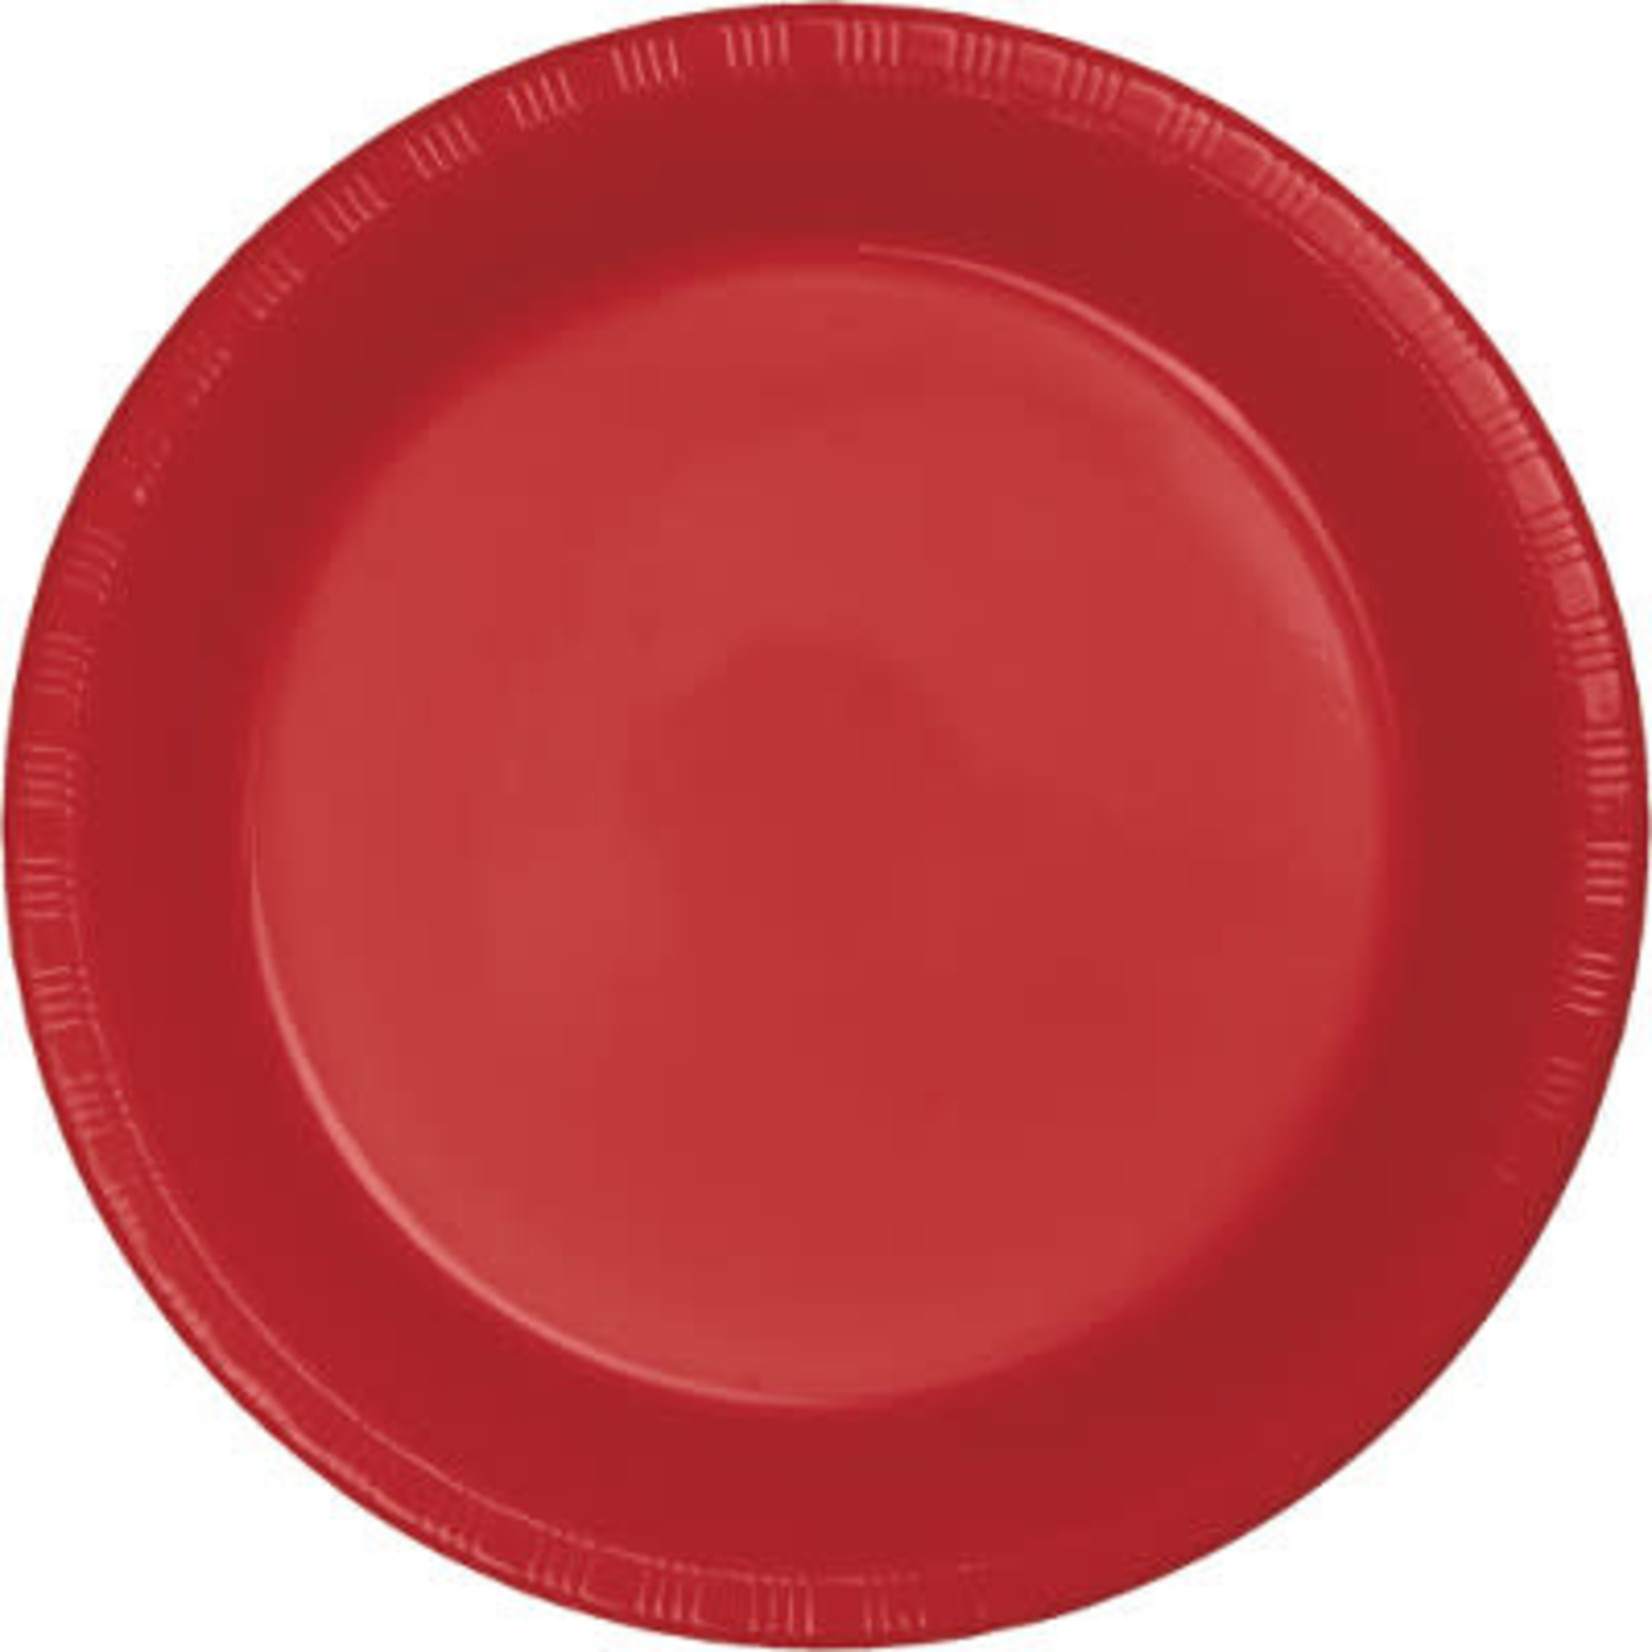 Touch of Color 7" Classic Red Plastic Plates - 20ct.